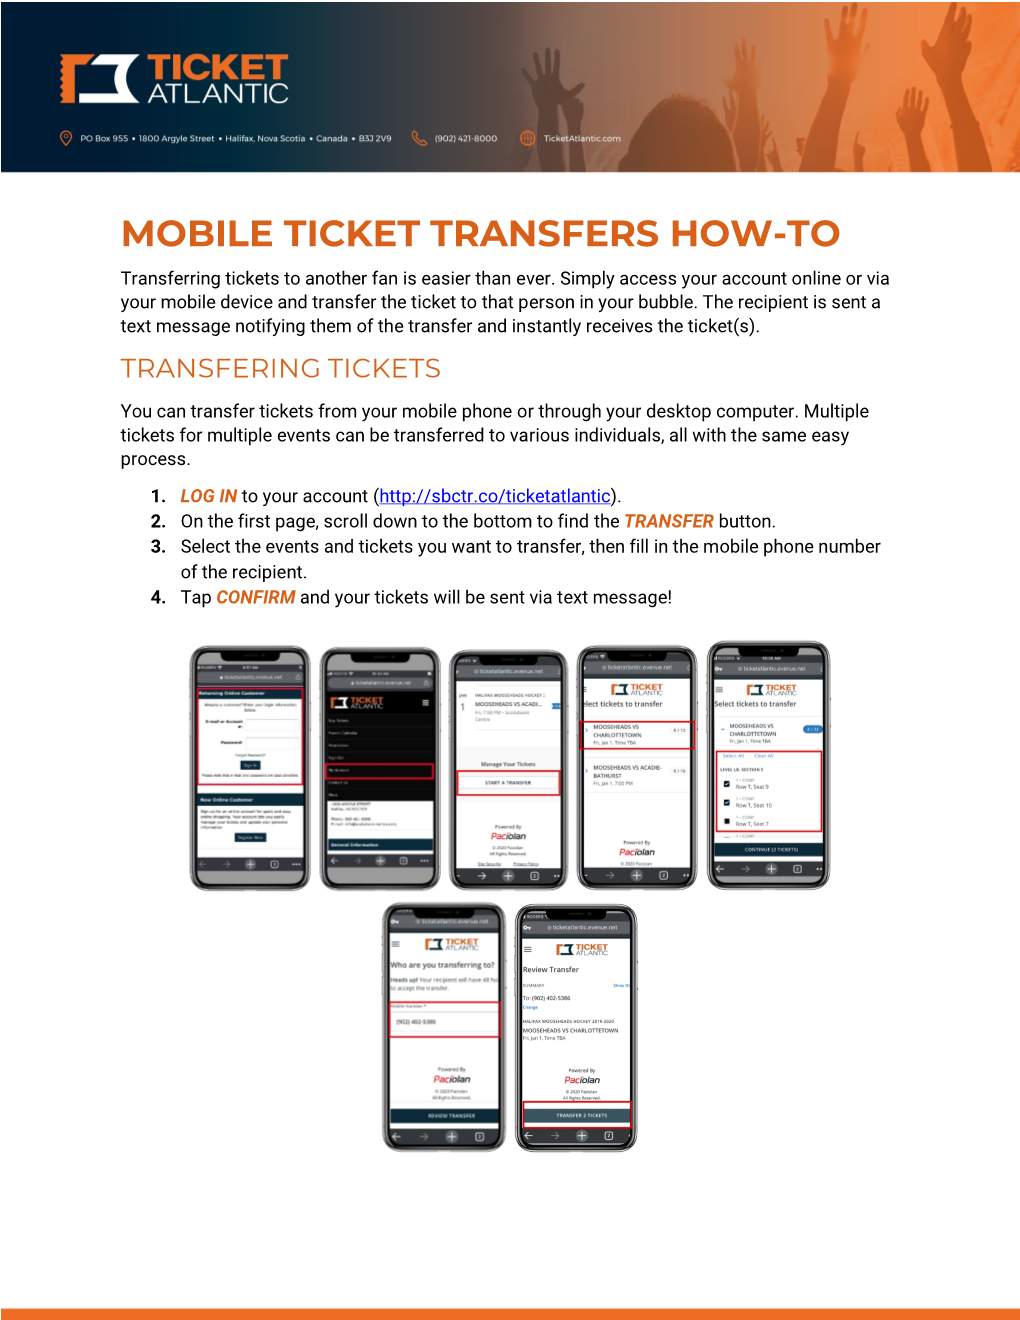 MOBILE TICKET TRANSFERS HOW-TO Transferring Tickets to Another Fan Is Easier Than Ever